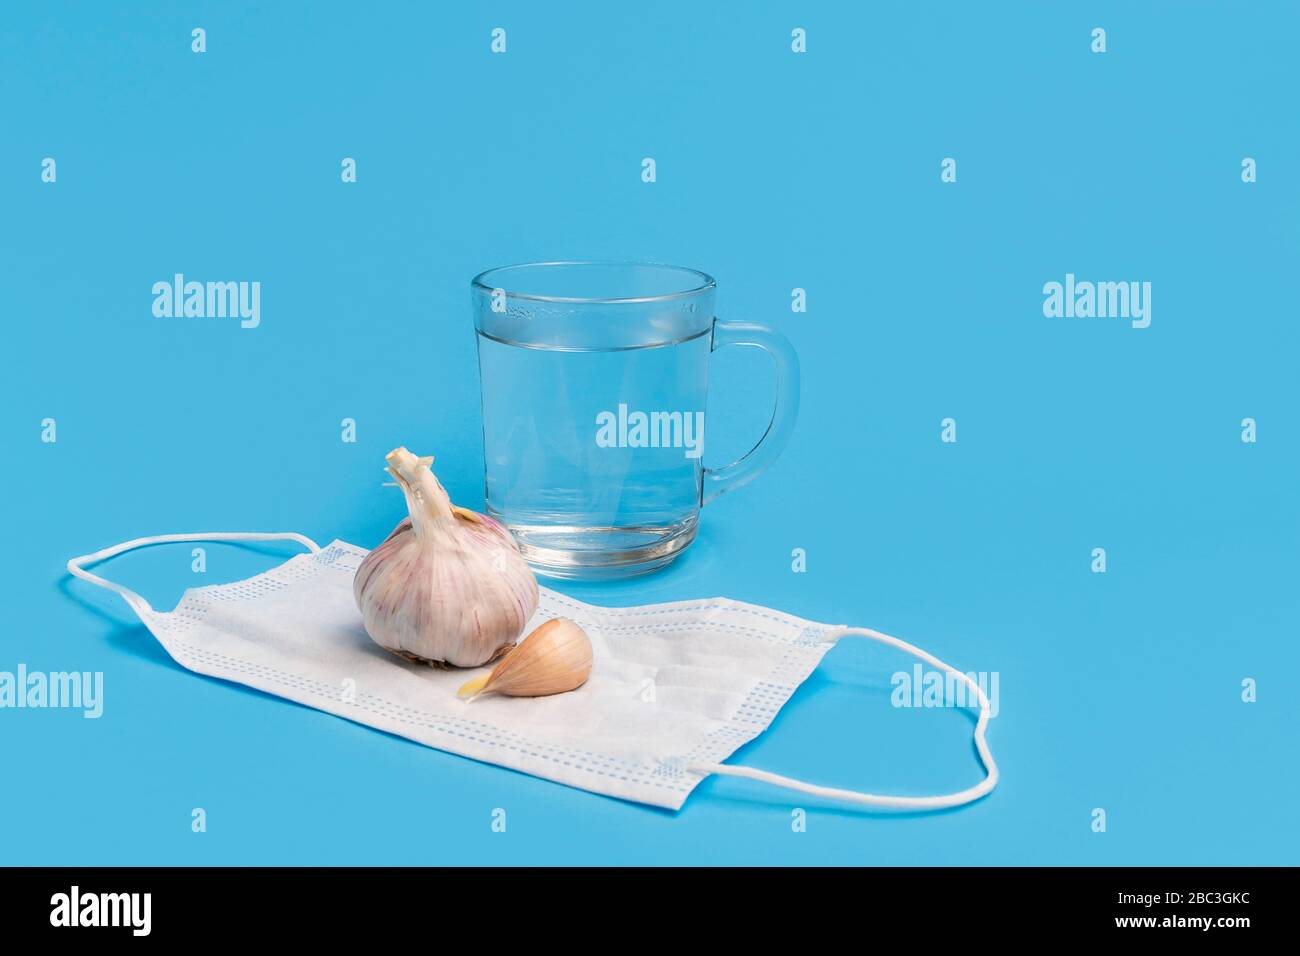 Coronavirus health myths concept, garlic, hot water, medical face mask on blue background with copy space Stock Photo